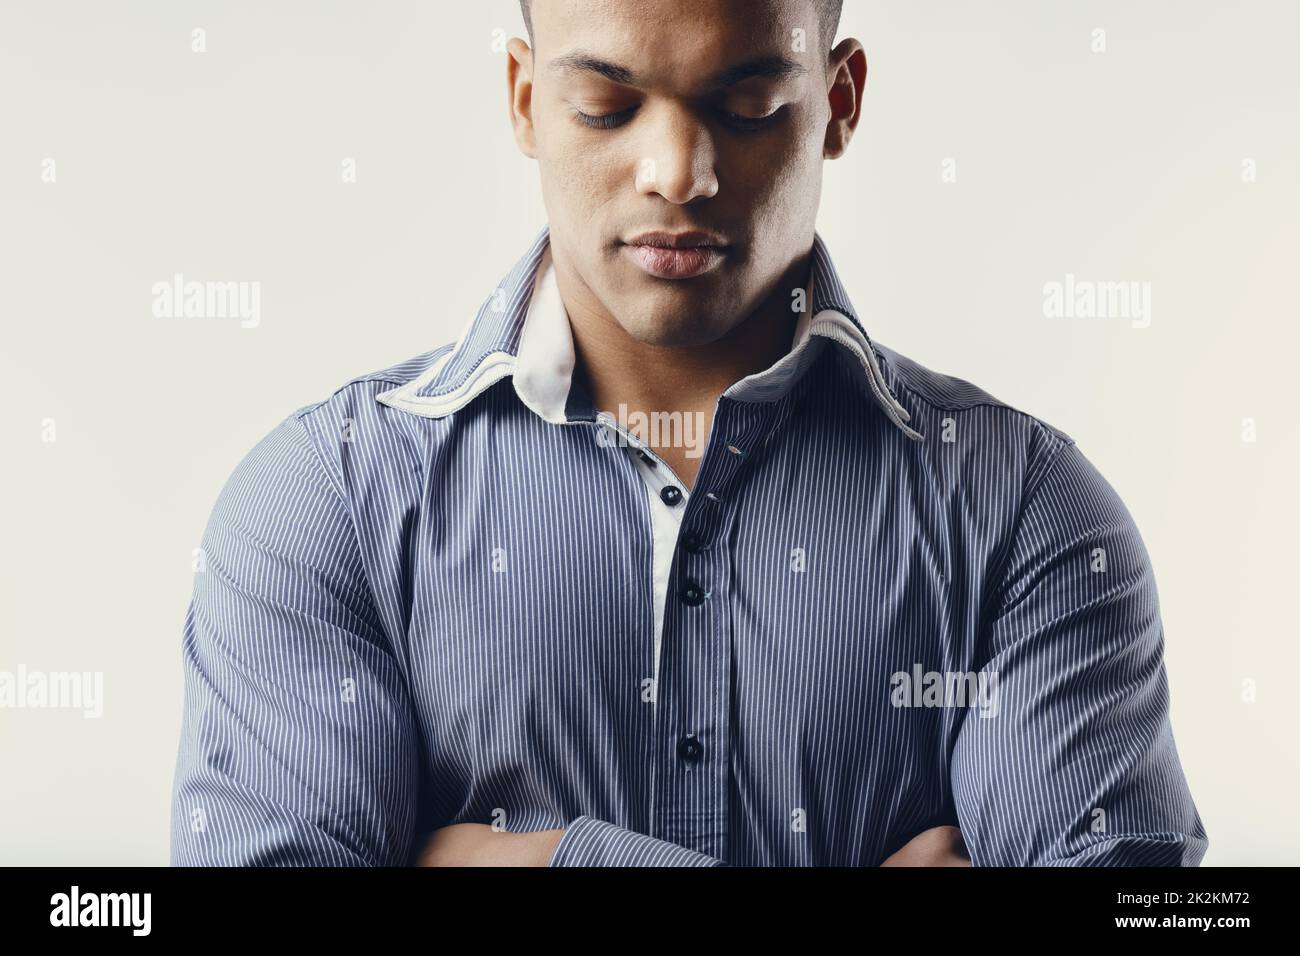 Young Black man standing with folded arms and closed eyes Stock Photo